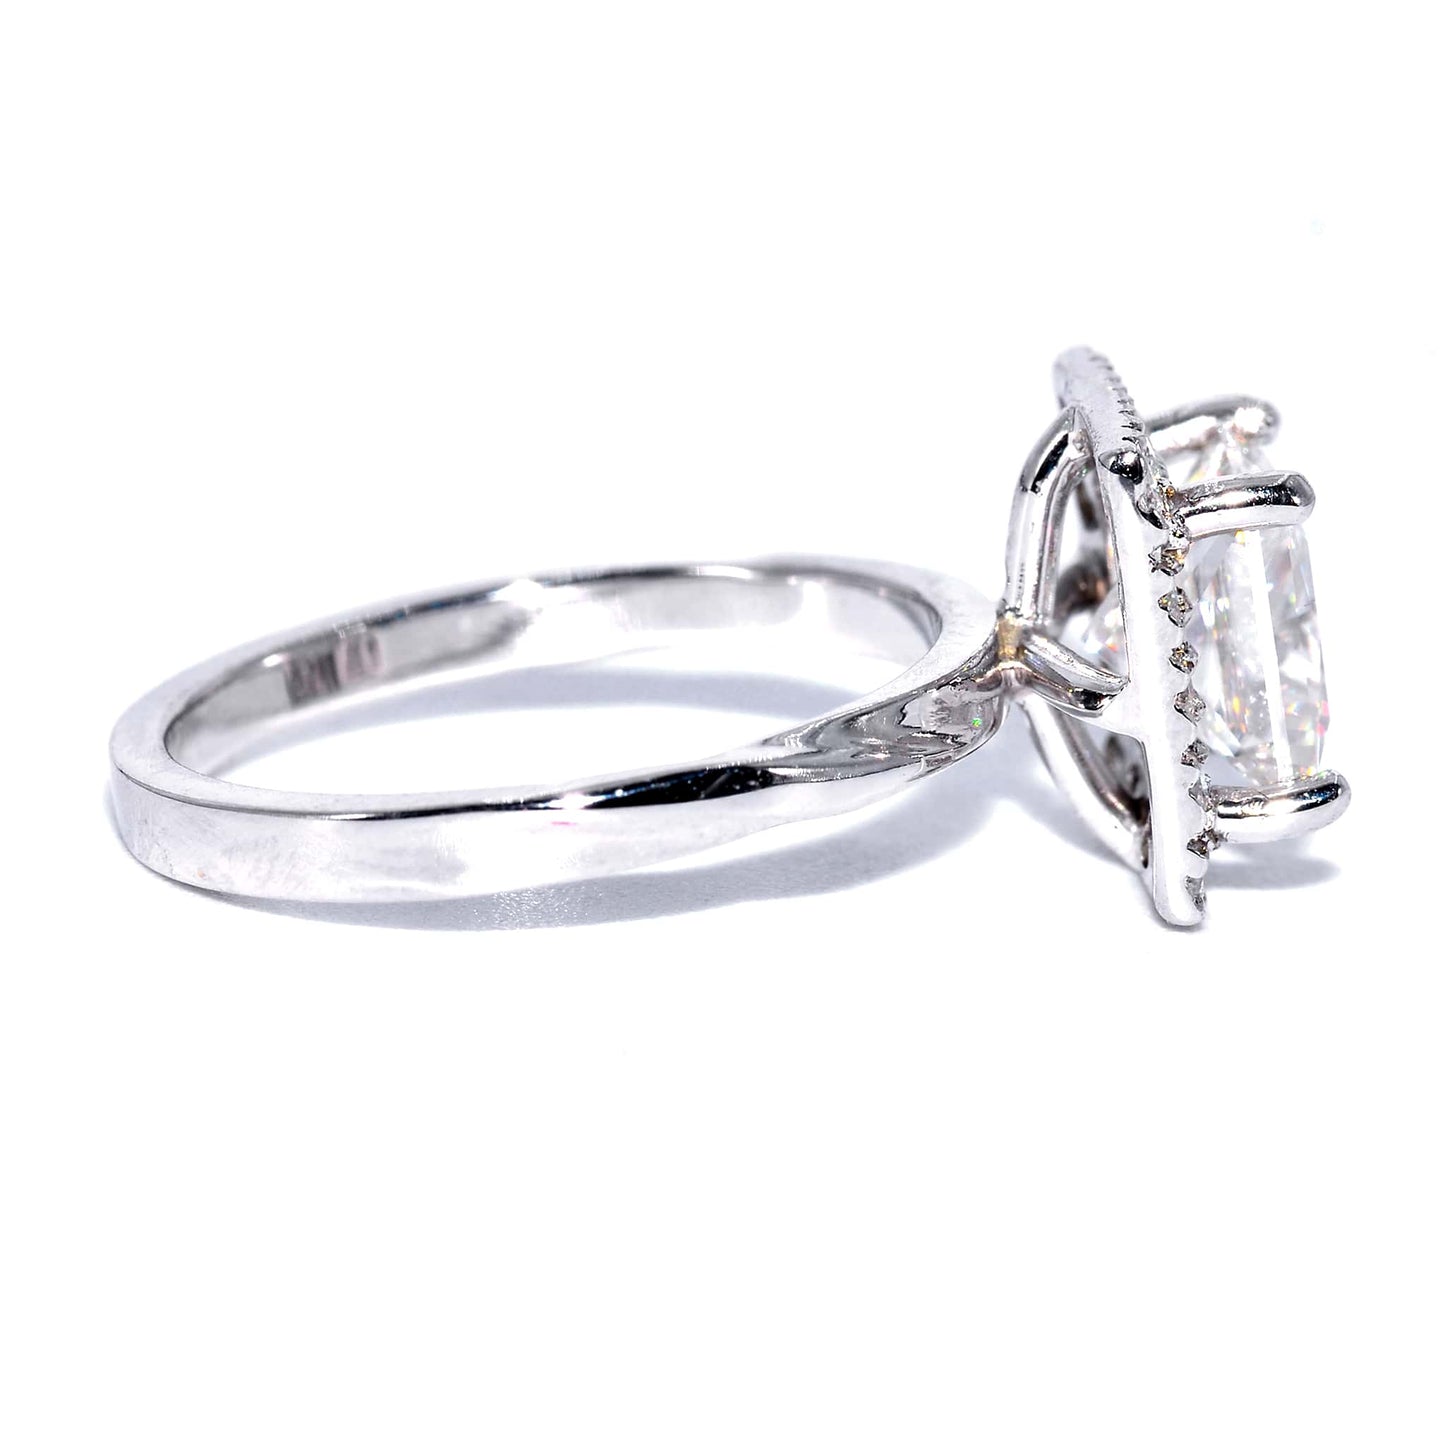 Moissanite ring is suitable for daily wear such as this princess cut moissanite ring 